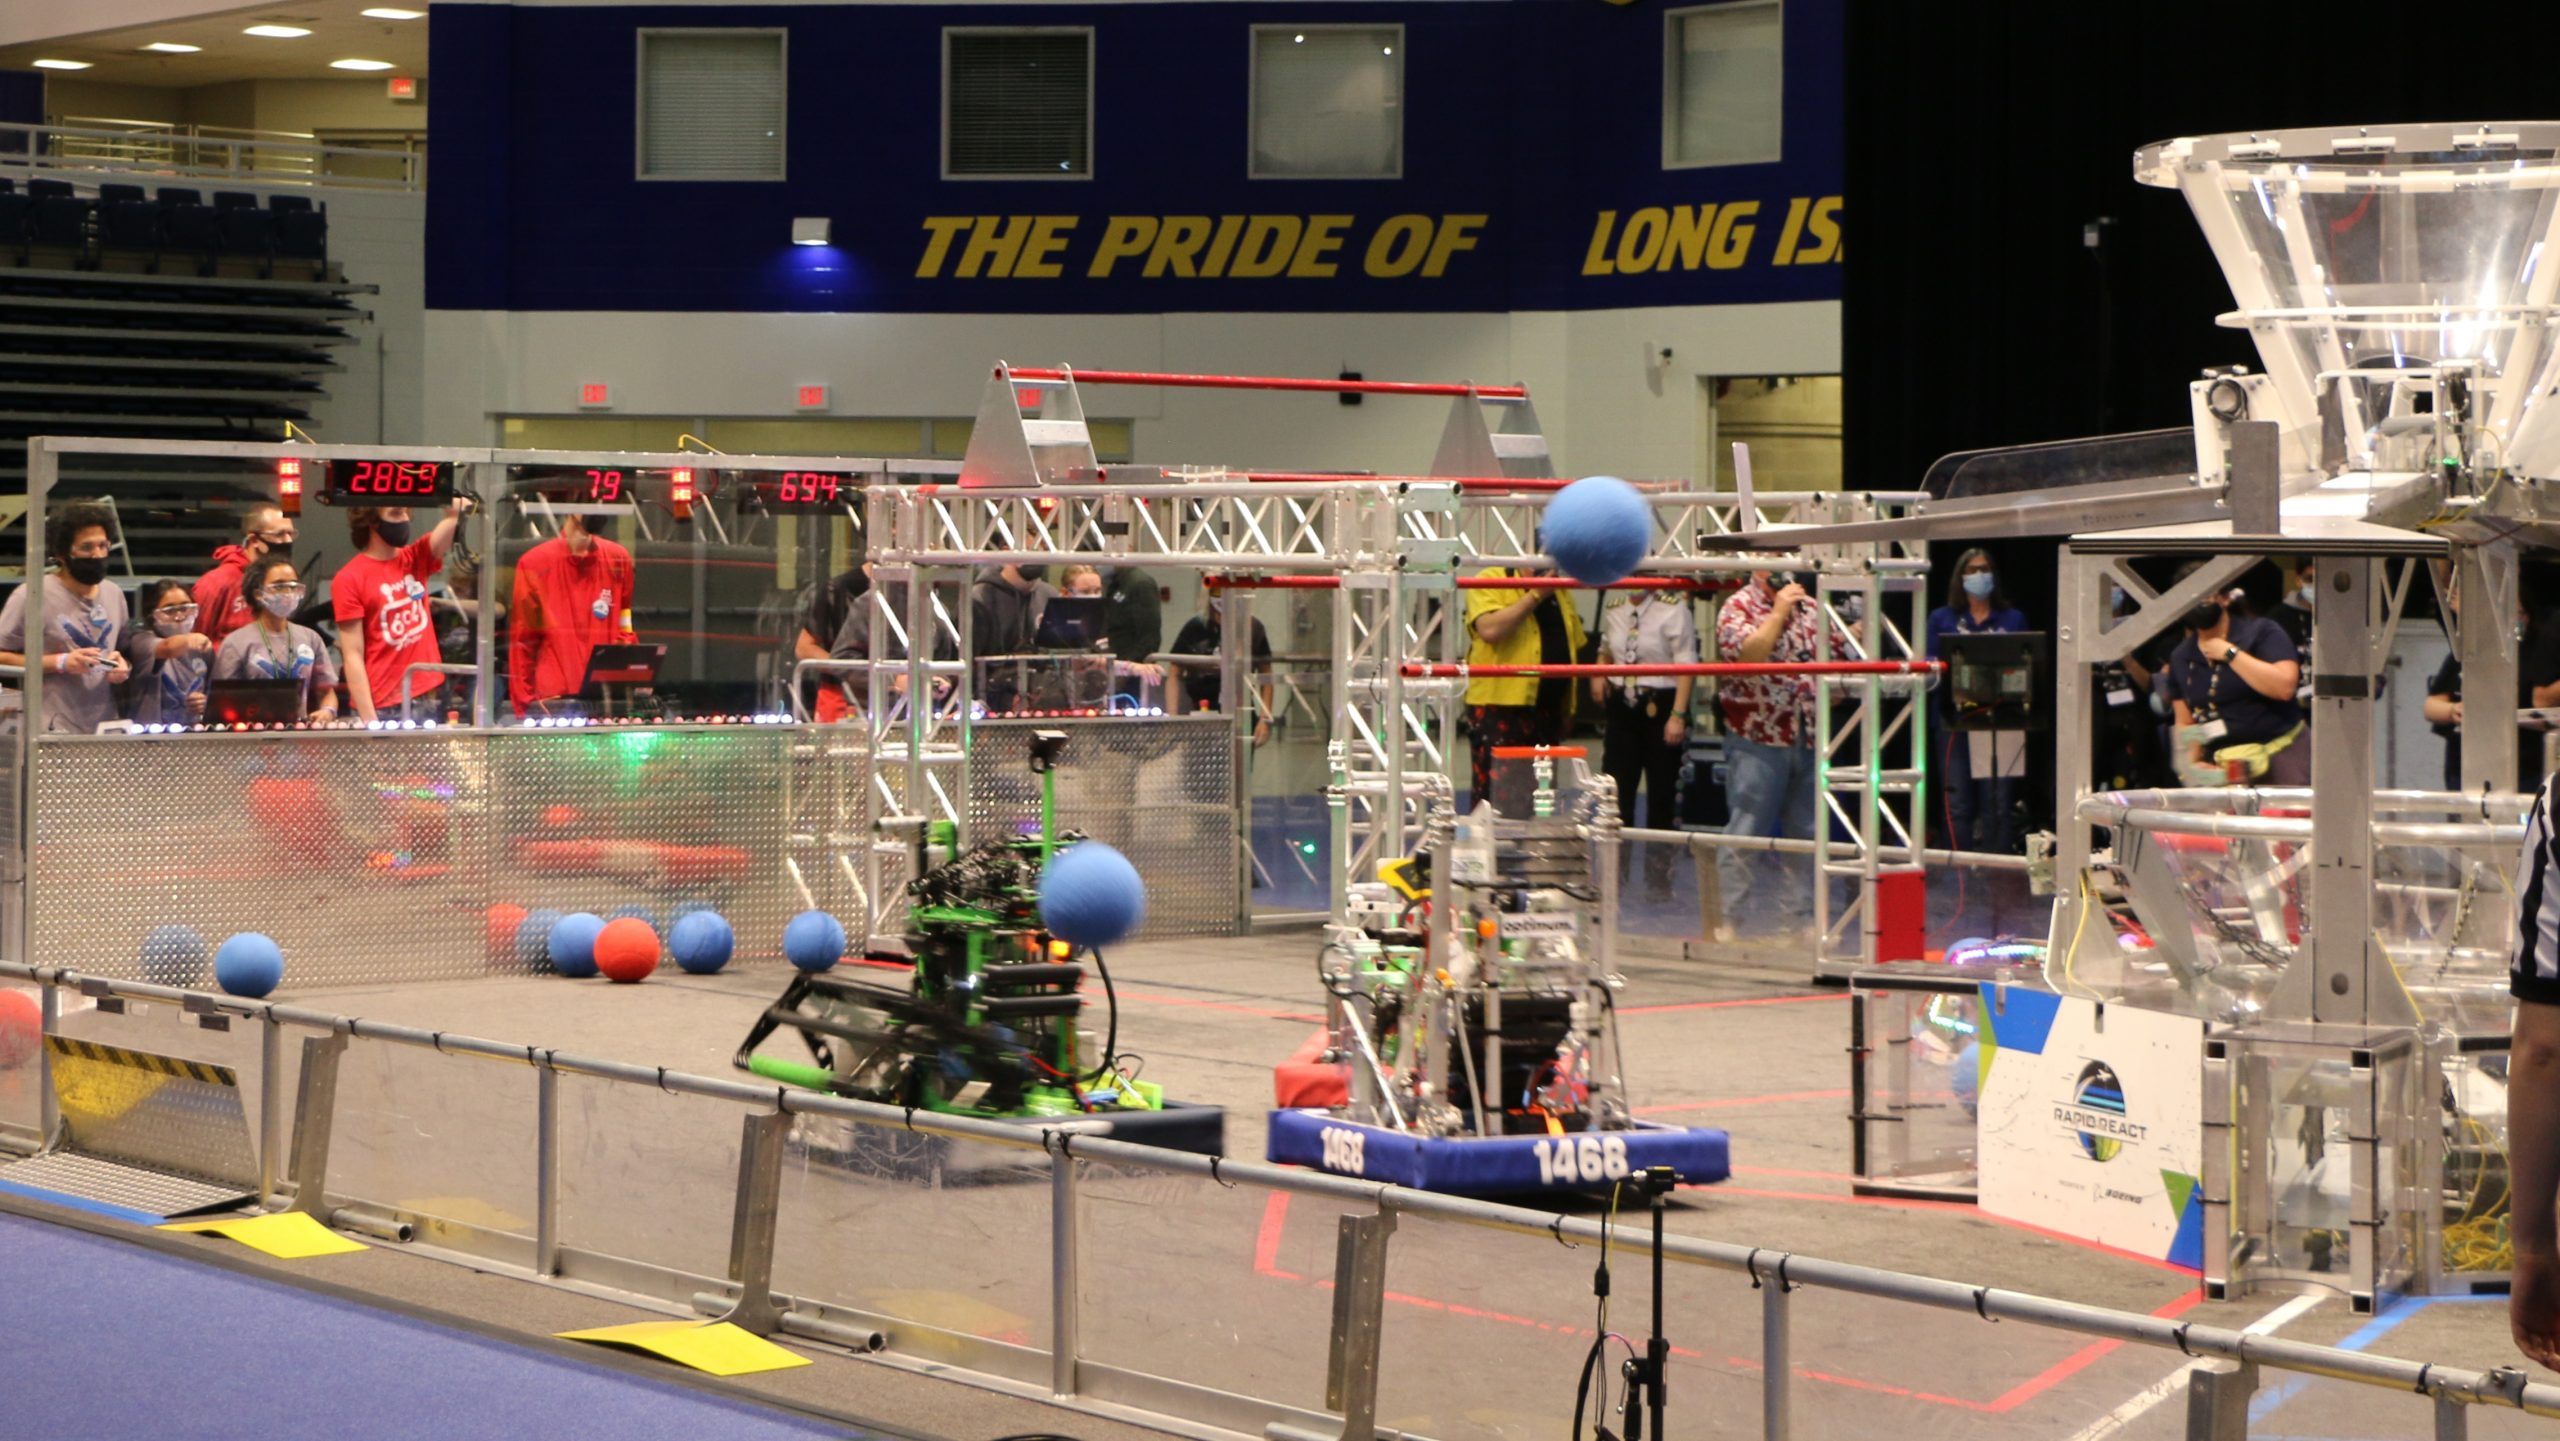 Blue Alliance robots from Team #1796 “RoboTigers” from Queens Technical High School and Team #1496 “Hicksville J-Birds” from Hicksville High School attempt to score their cargo into the hub during the finals of the 2022 SBPLI Long Island Regional #2.